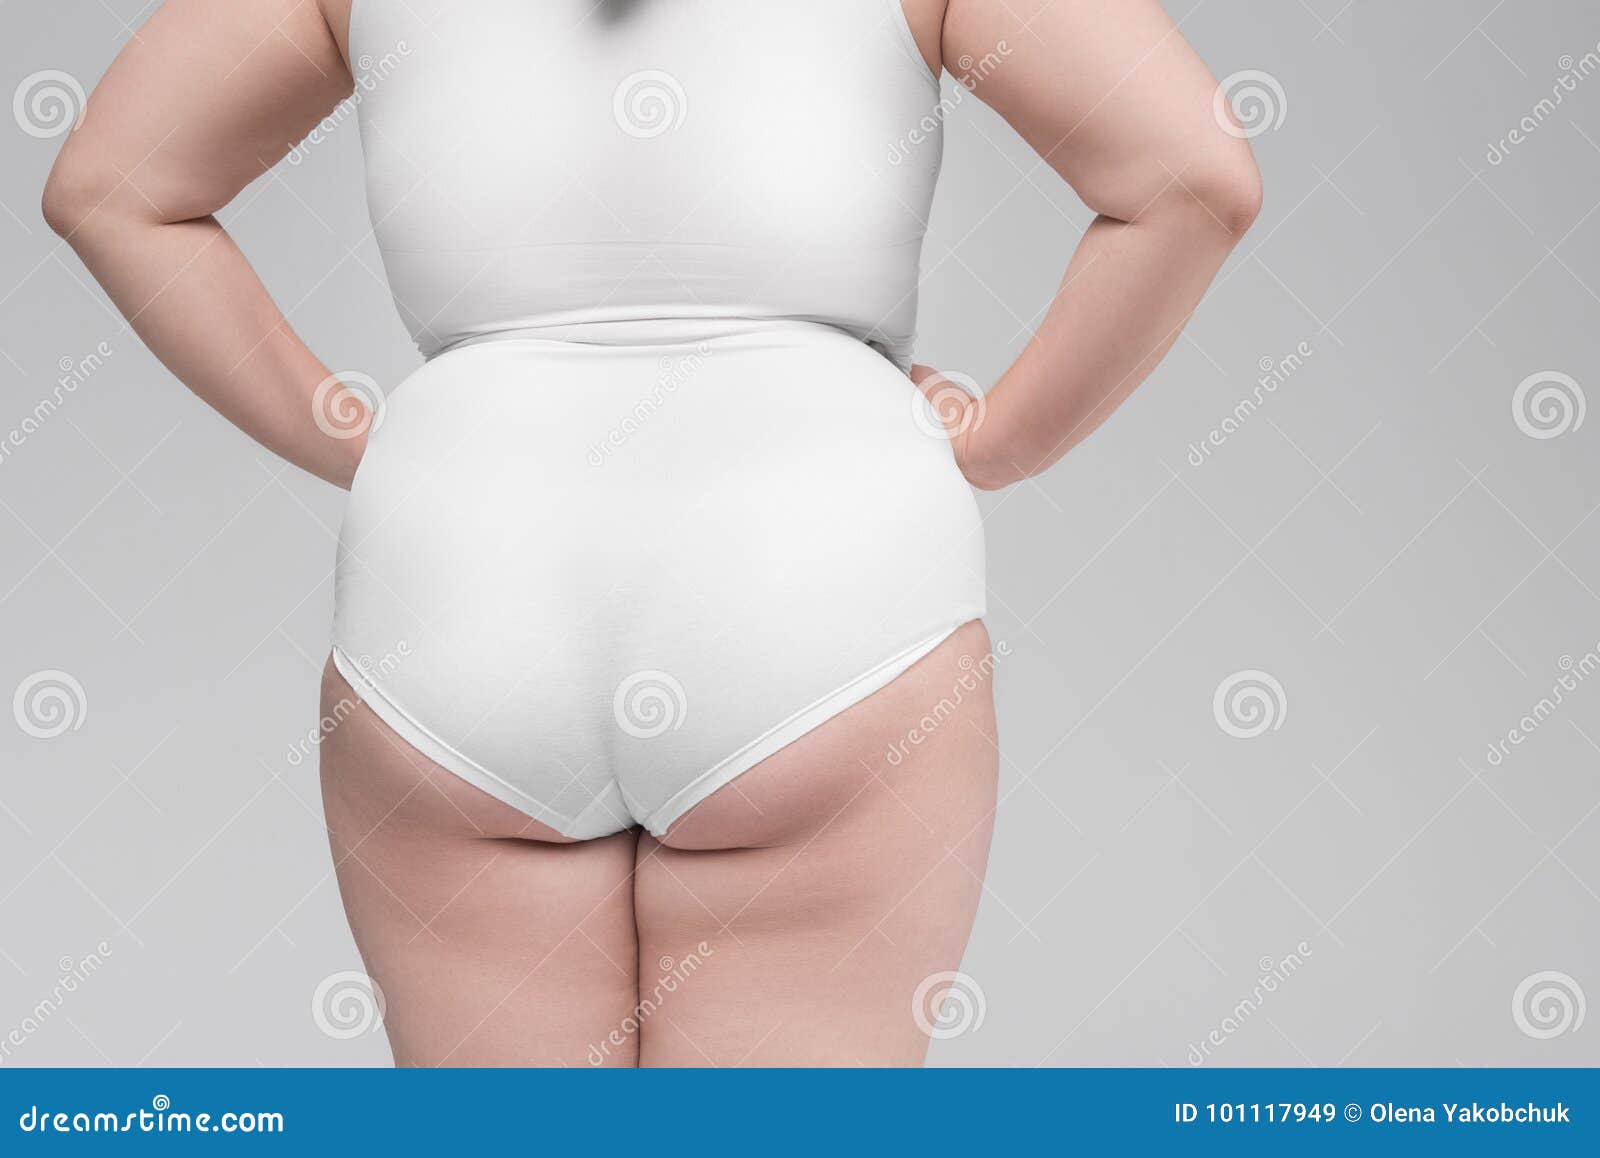 Back of Thick Girl Posing in Underwear Stock Image - Image of sensual,  buttocks: 101117949